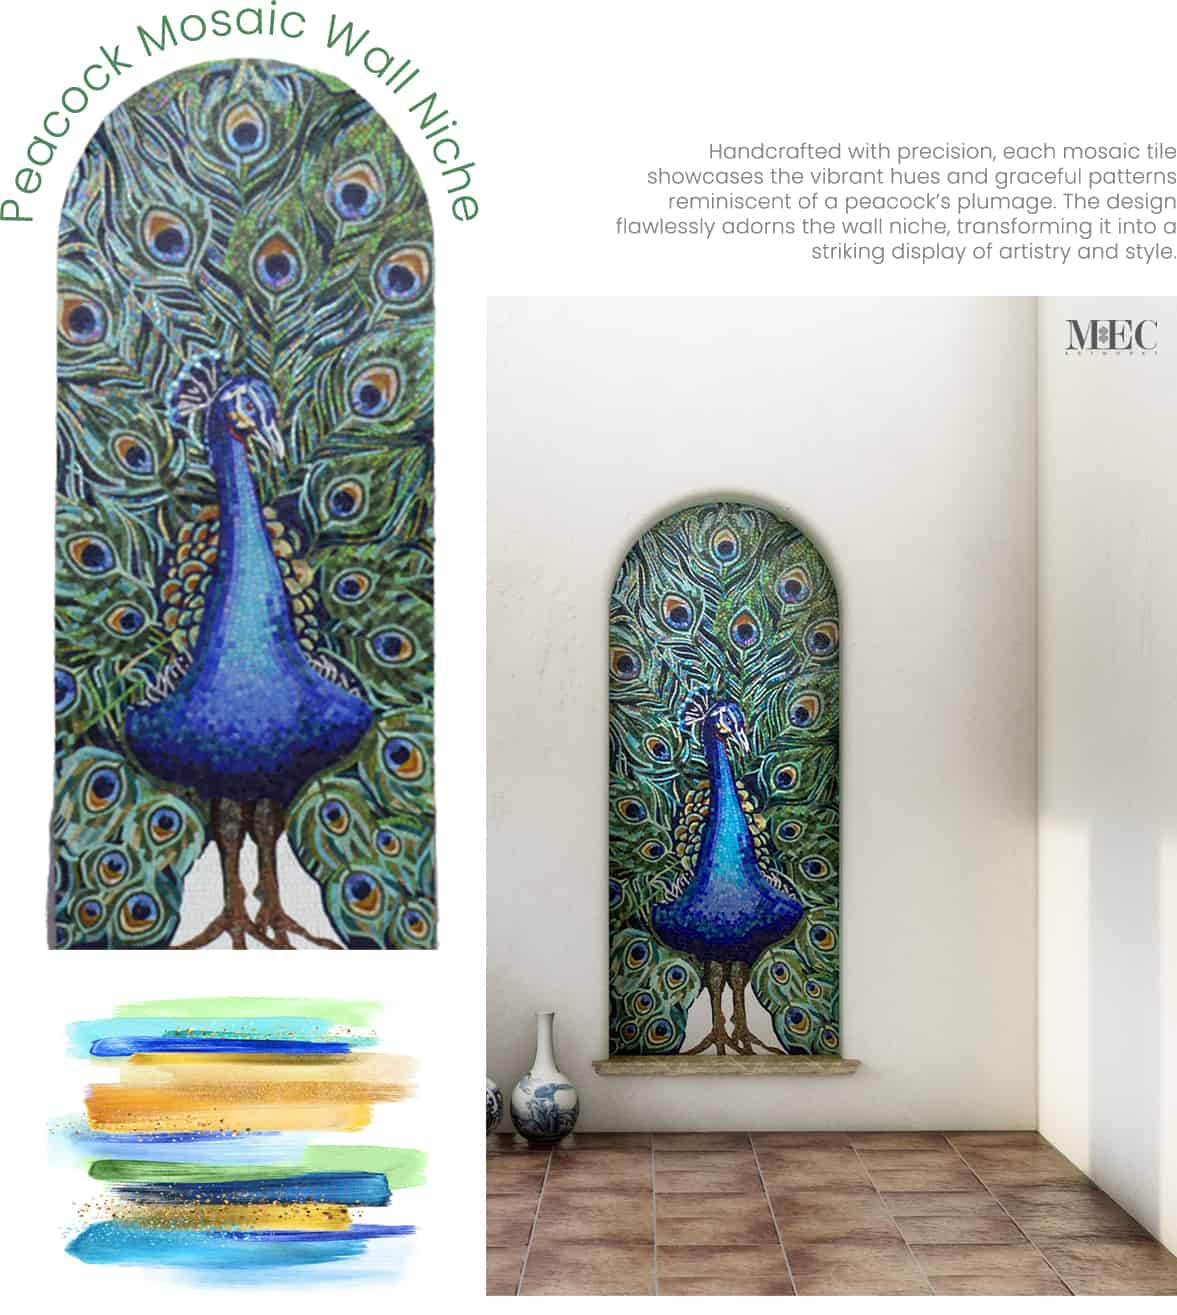 A peacock mosaic niche collage that has a smooth and shiny surface. The glass mosaicthat form a peacock's head, body, and feathers in different shades of blue, green, and purple. The right image shows a close-up view of the mosaic, highlighting the intricate details and colors of the mosaics. 